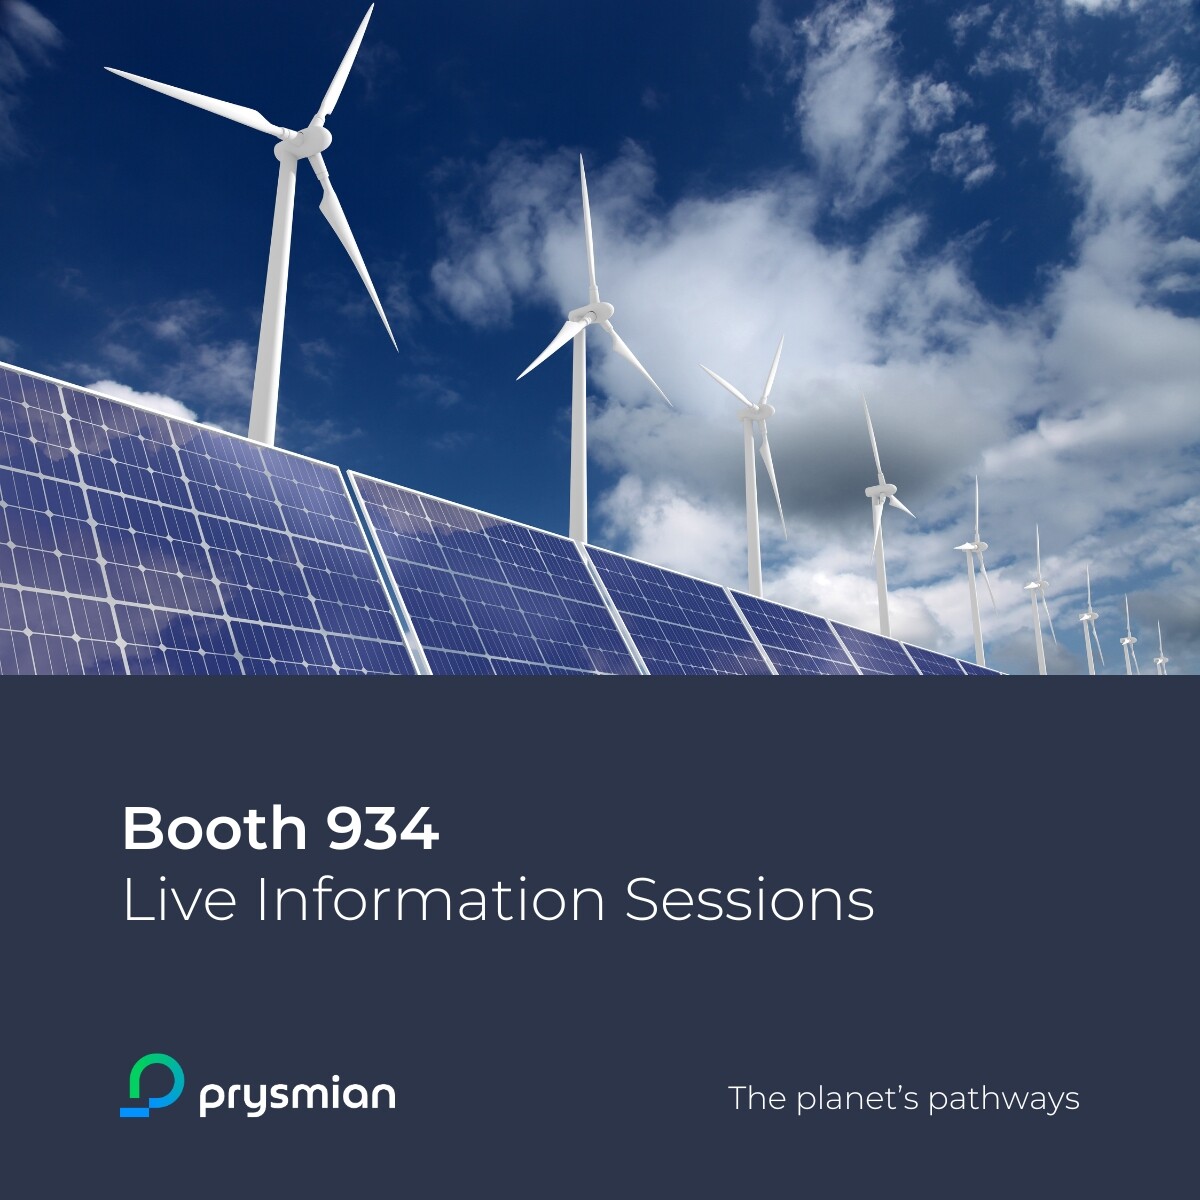 Join us this week for live information sessions at CLEANPOWER 2024! •Tuesday, May 7th (2-3pm CDT): MV Accessories & Elaspeed-S with Bill Wolfe •Wednesday, May 8th (10-11am CDT): Sustainability & Alesea – Boosting Circularity with Maura Nespoli & Nina Dantas •Thursday, May…